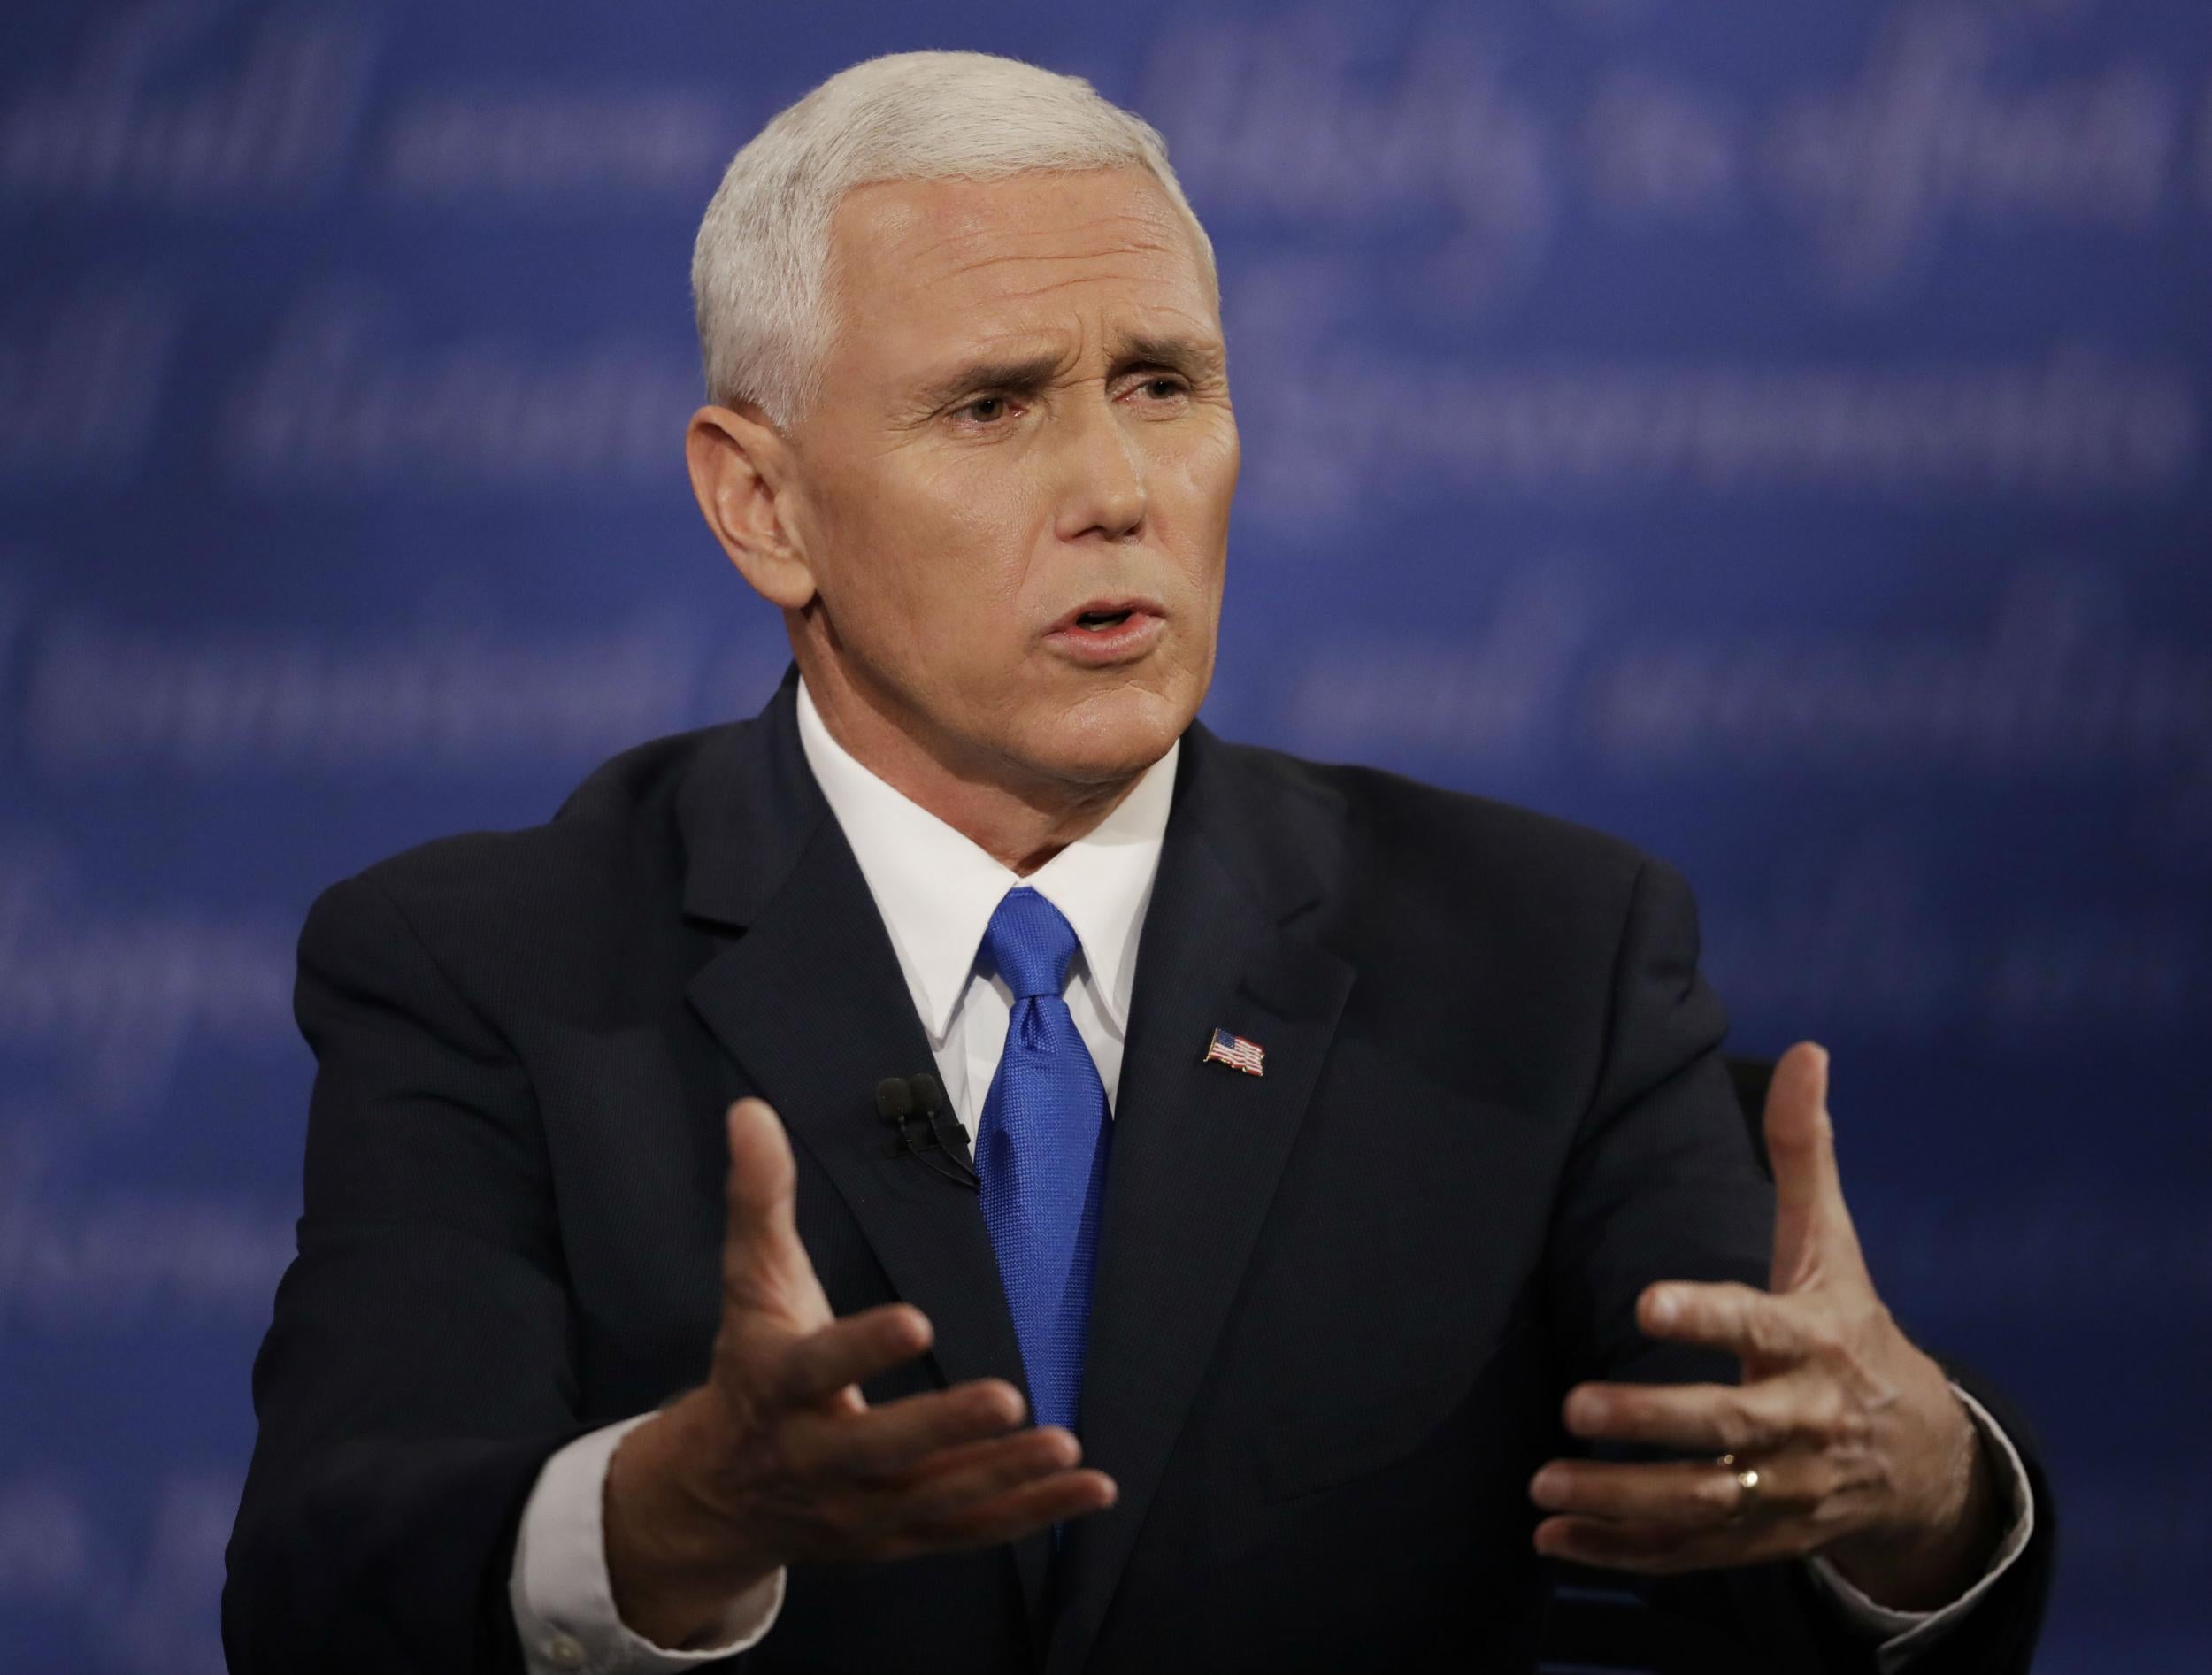 Mike Pence believes that women are only valuable as vessels for procreation